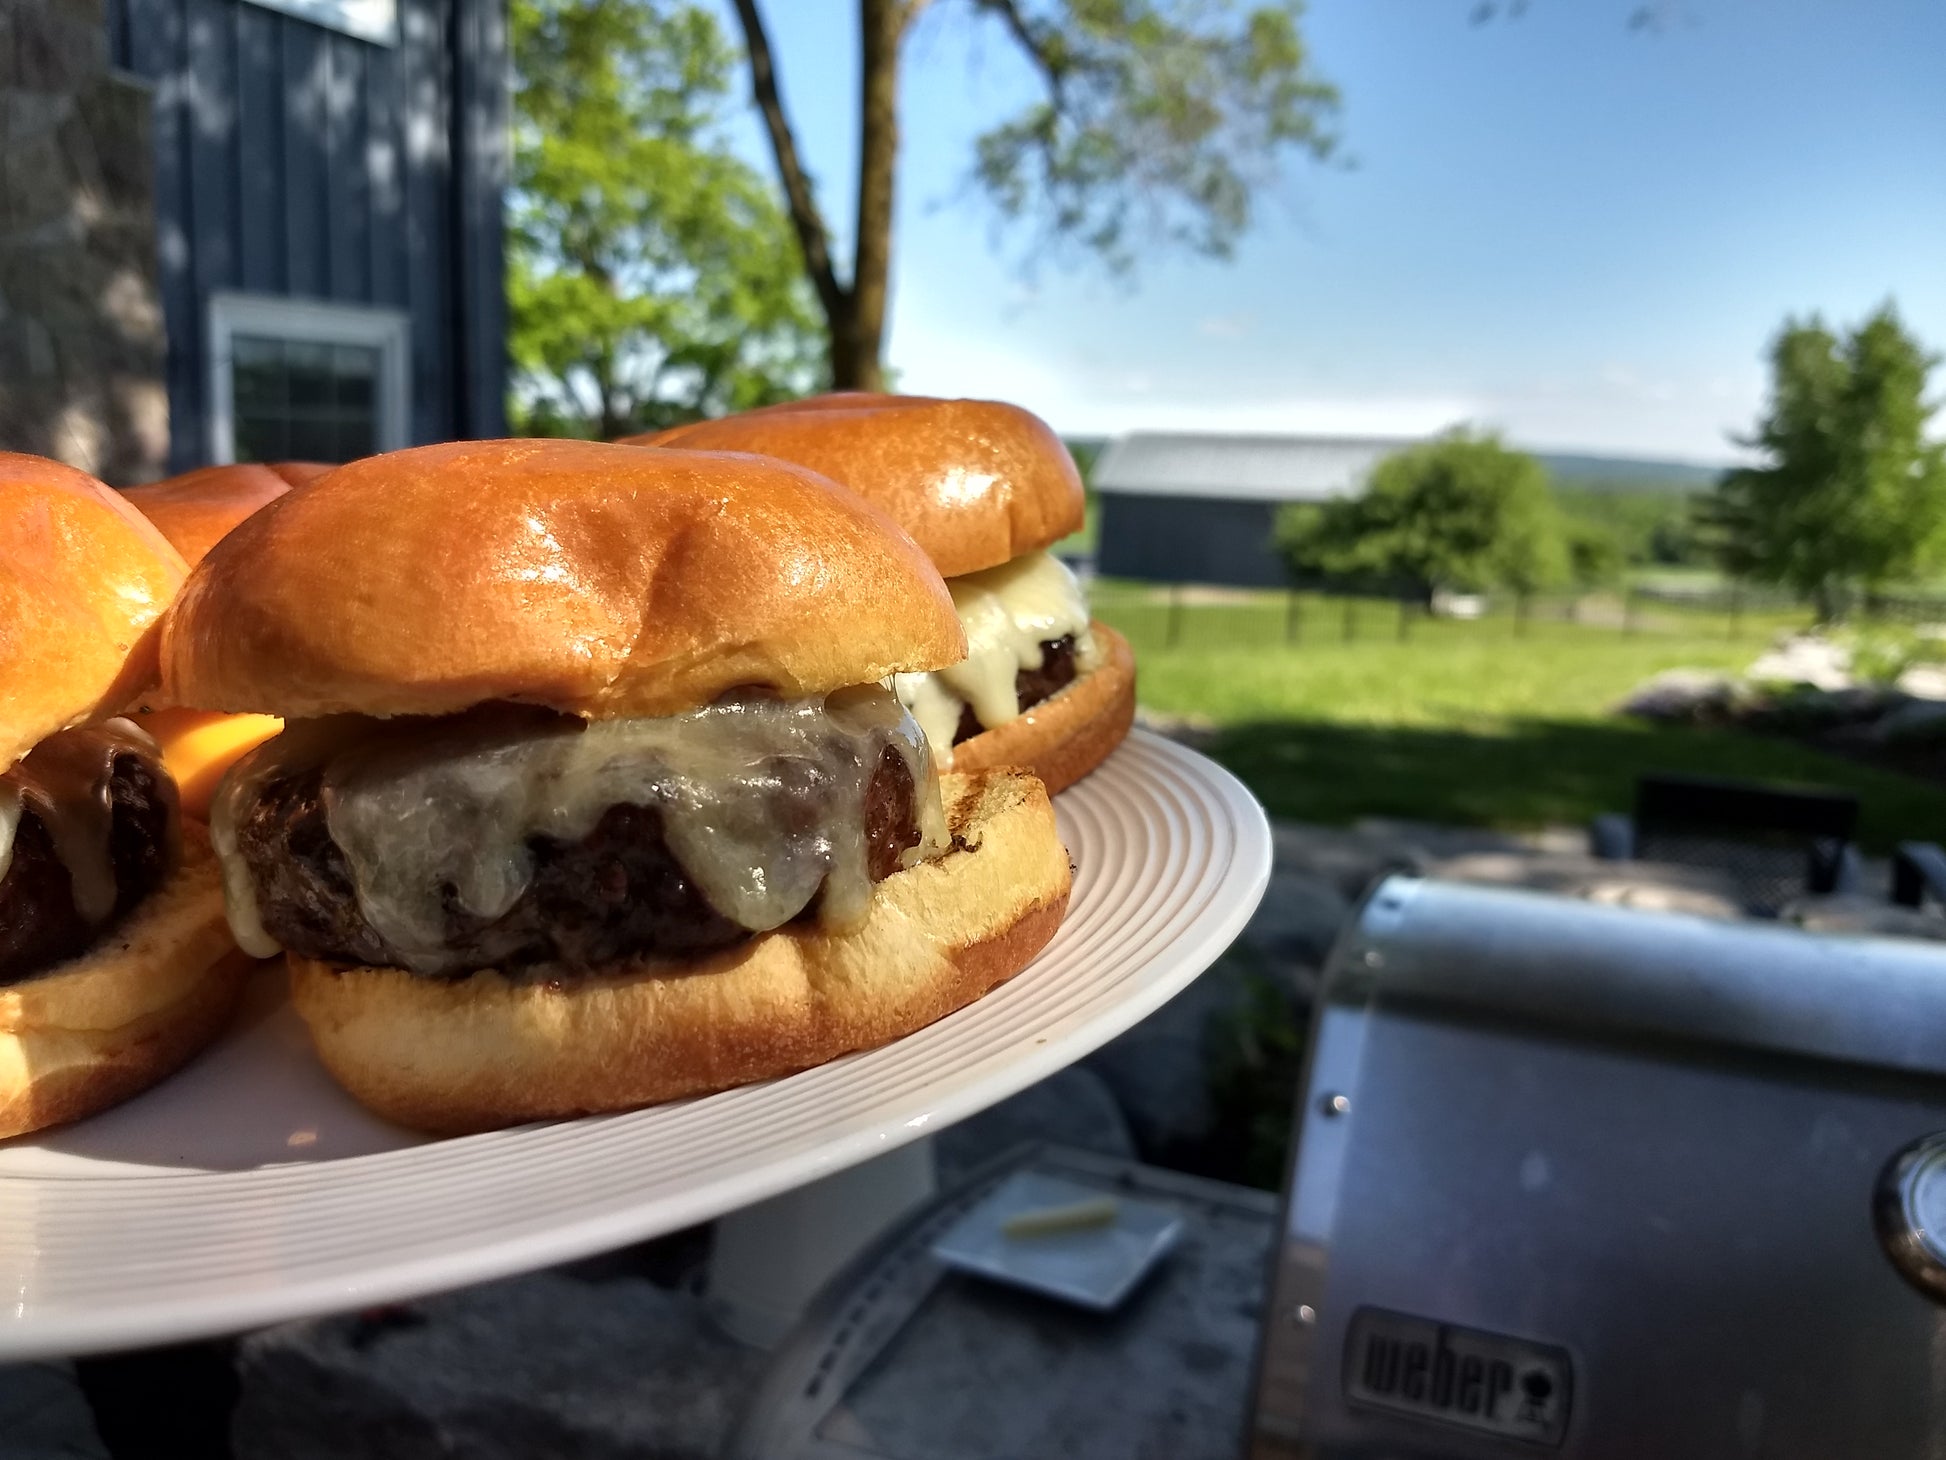 side view of a plate full of plain cheese burgers with a blurred view of a weber bbq, backyard and trees in the background